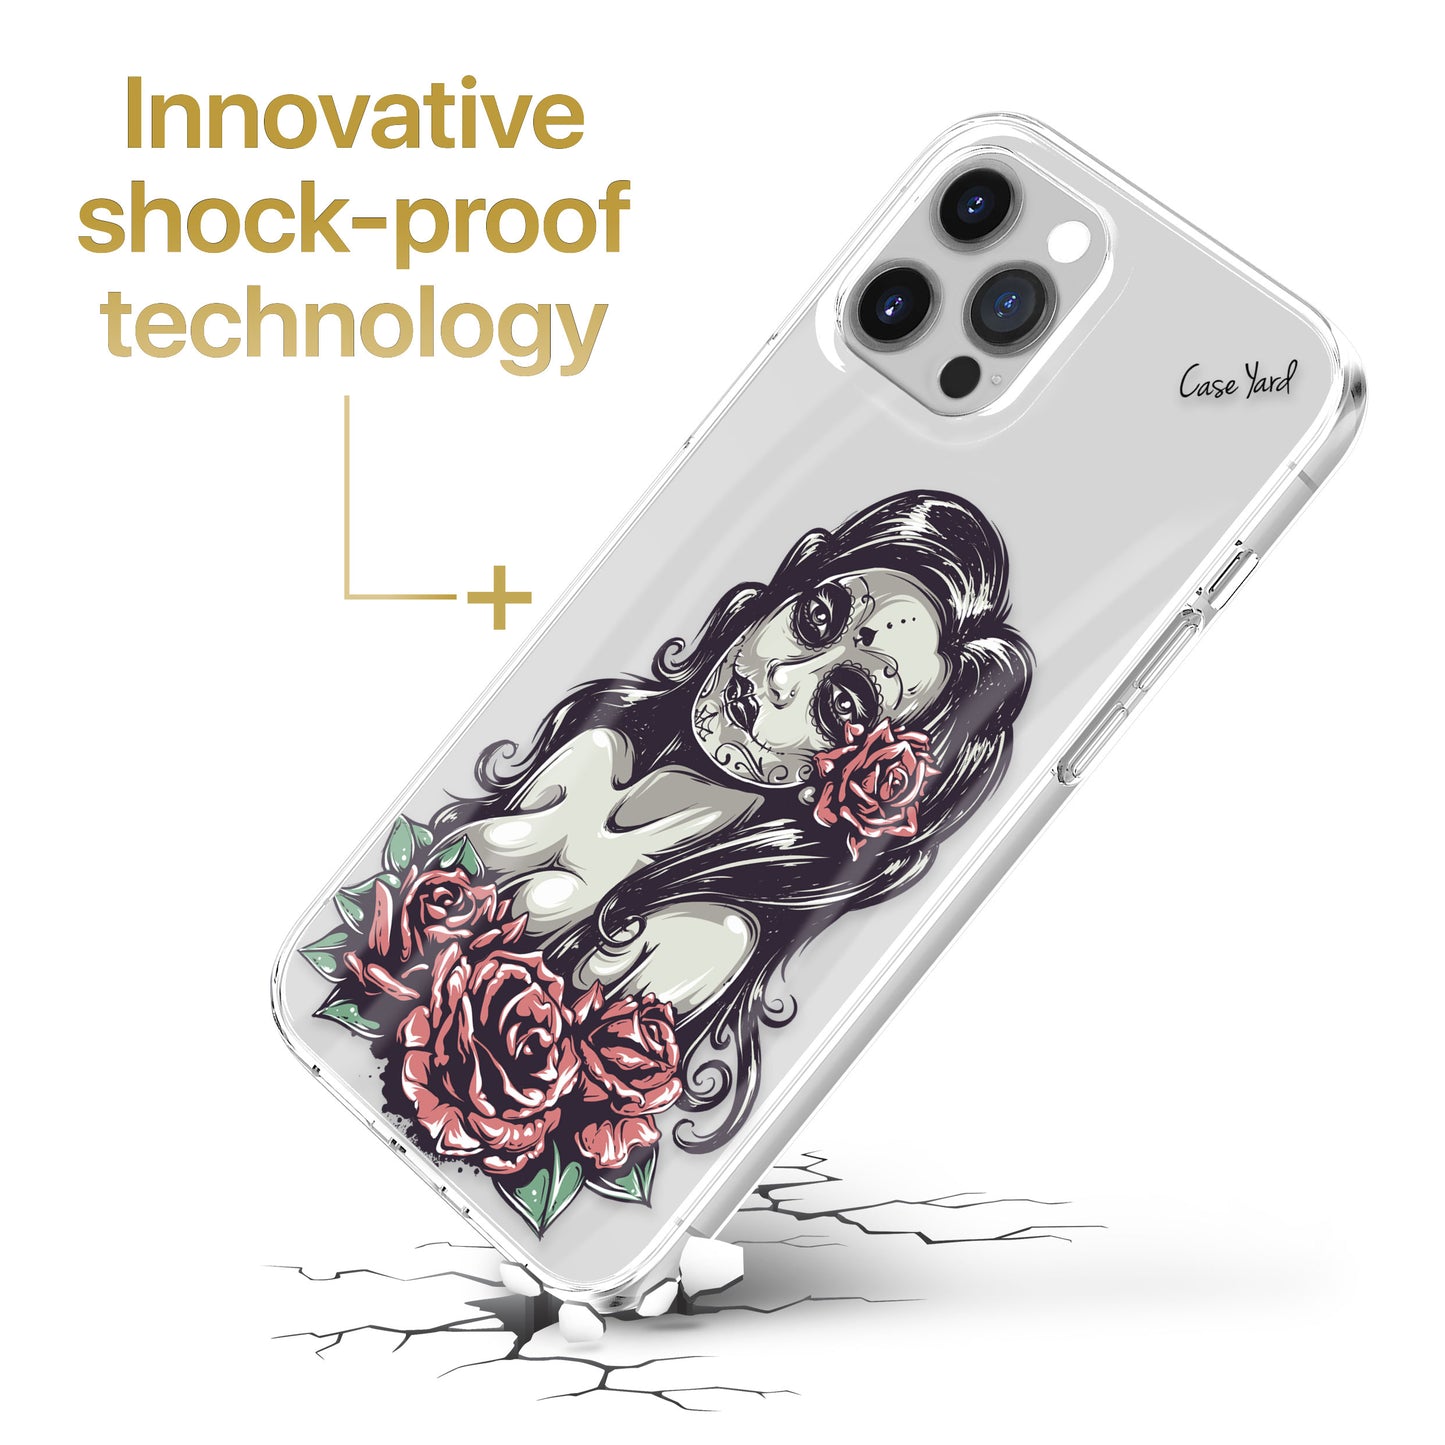 TPU Clear case with (Chicas de los Muertos) Design for iPhone & Samsung Phones